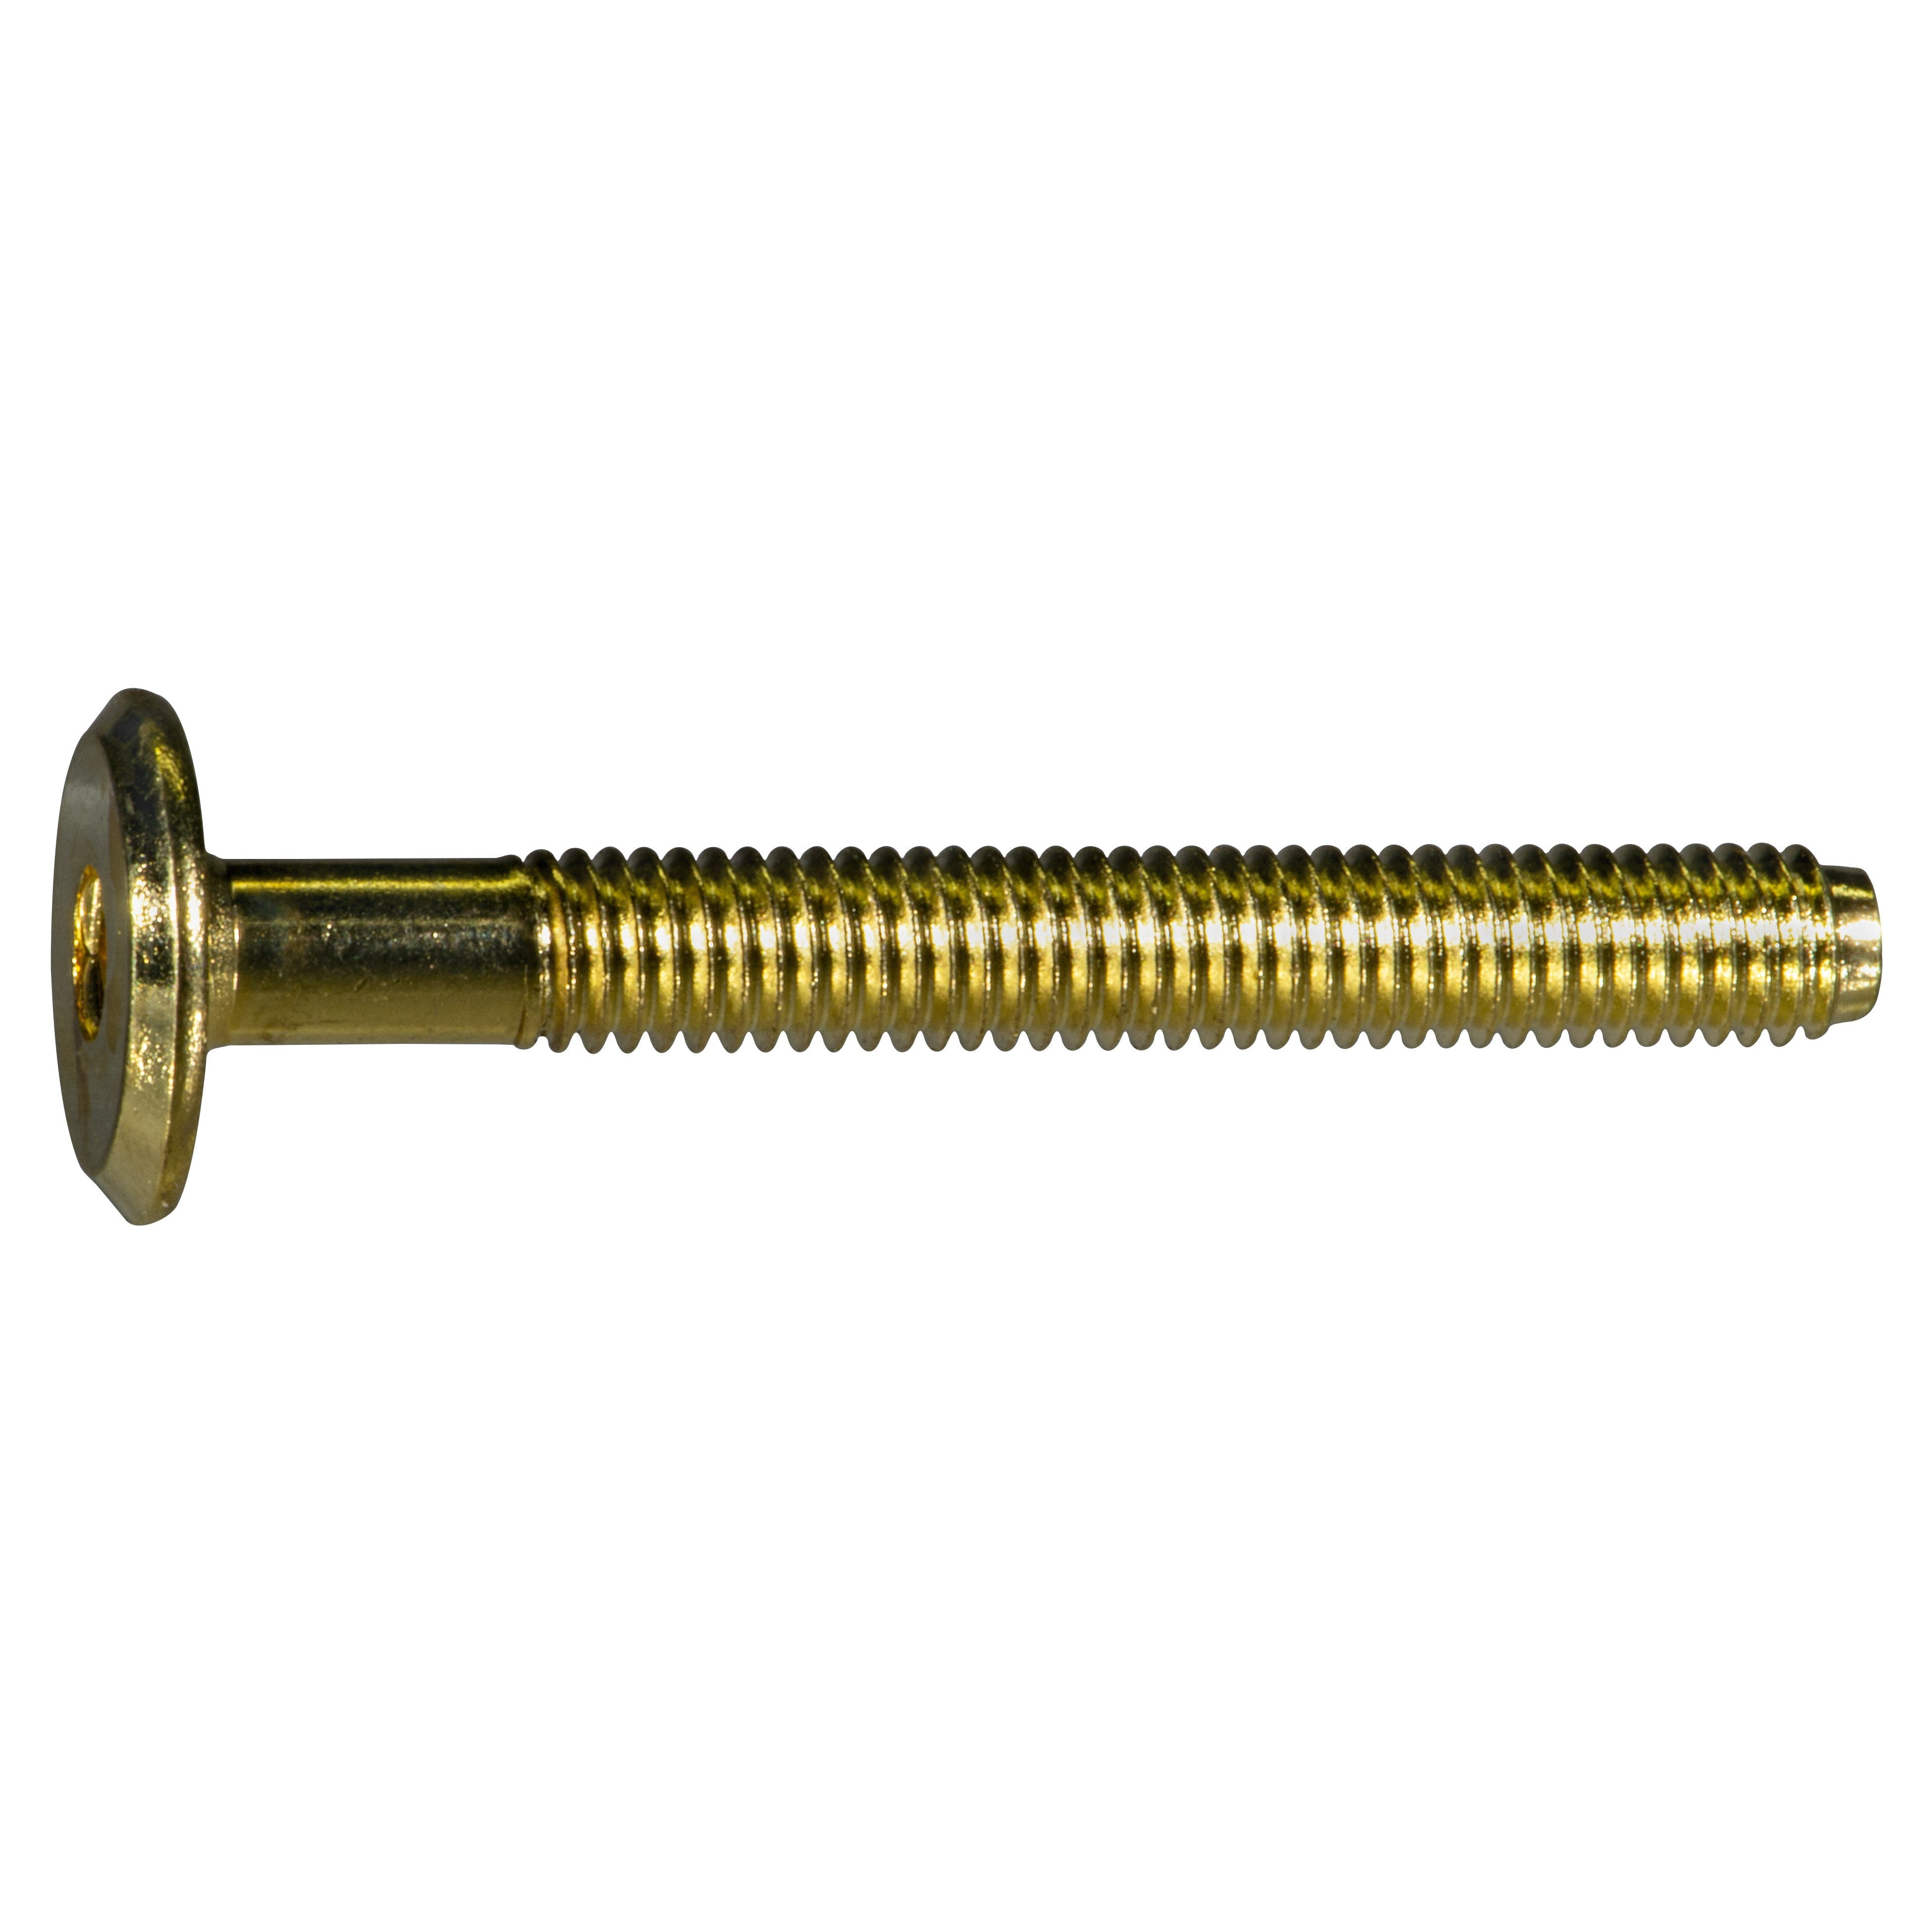 6mm GOLD PLATED AMPLIFIER POWER AND SPEAKER TERMINAL SET SCREWS 8pcs 